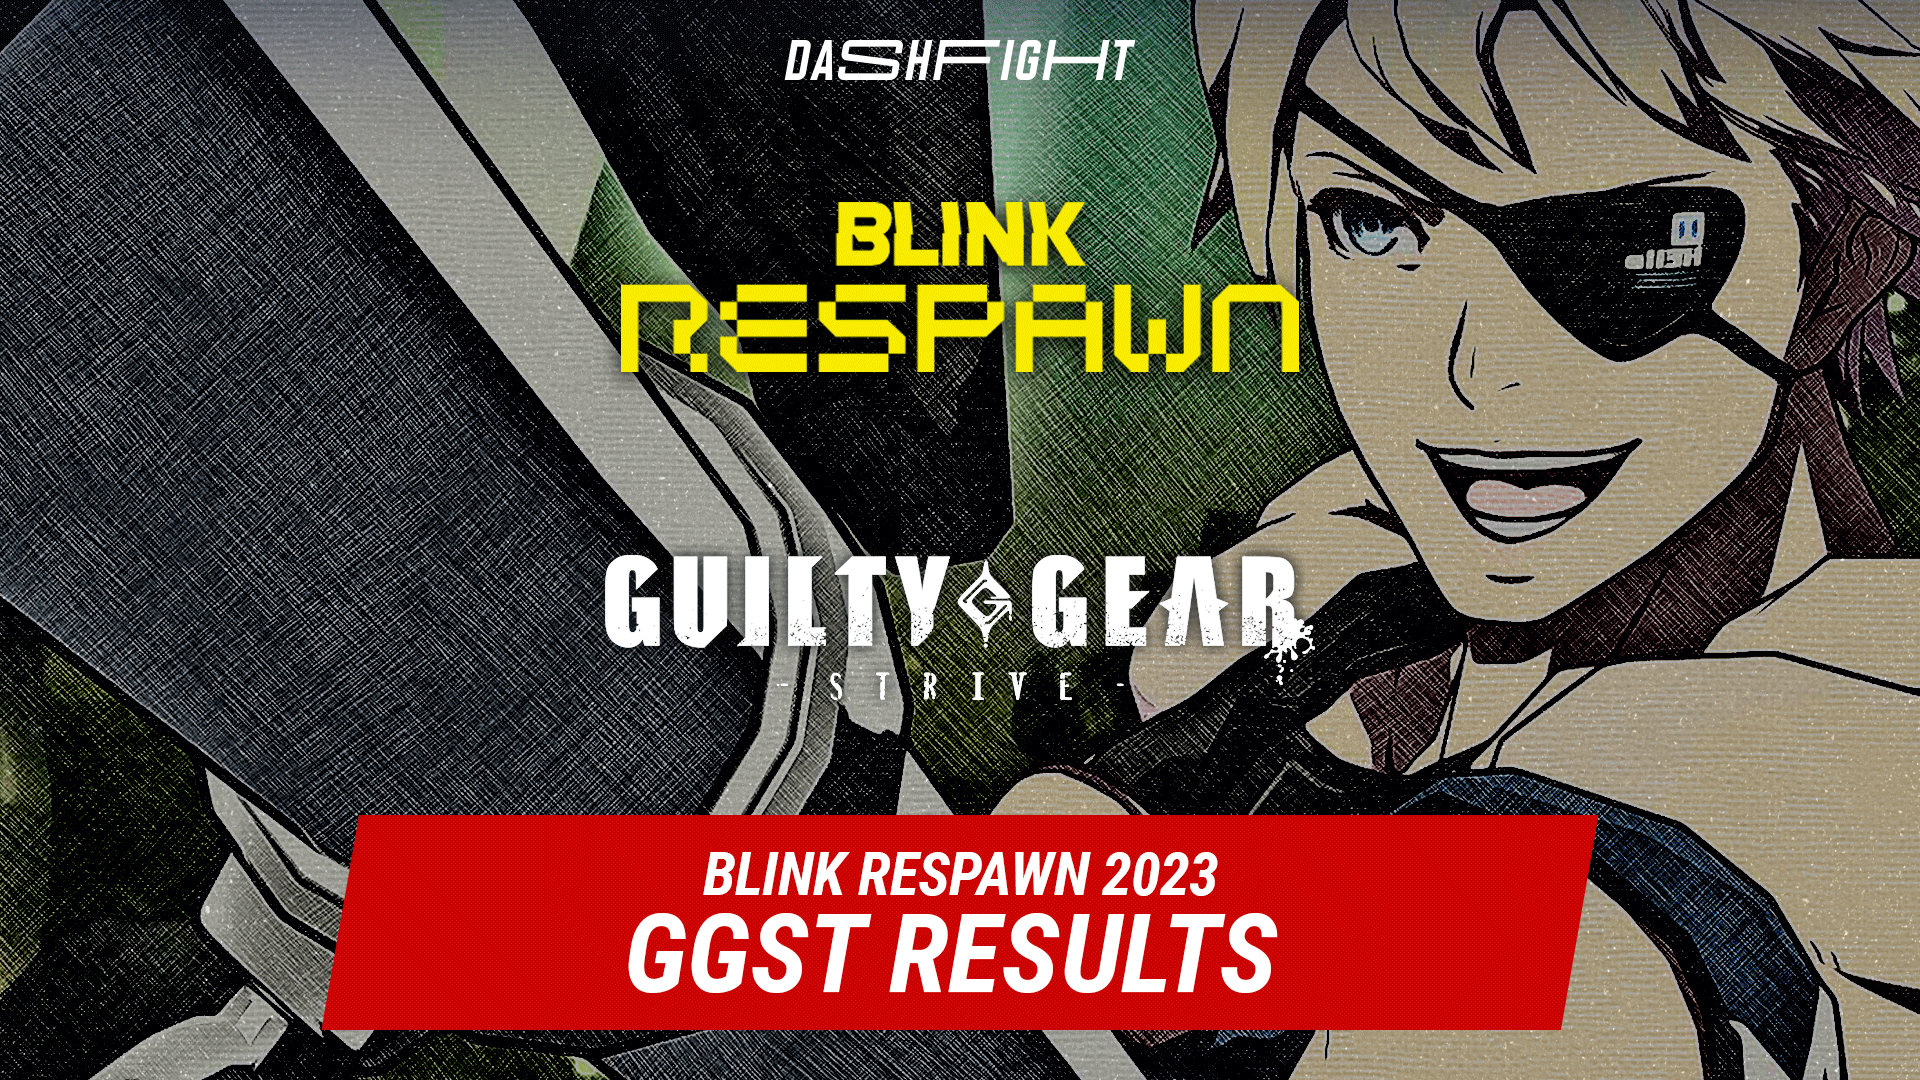 Blink Respawn 2023 Guilty Gear -STRIVE- Results